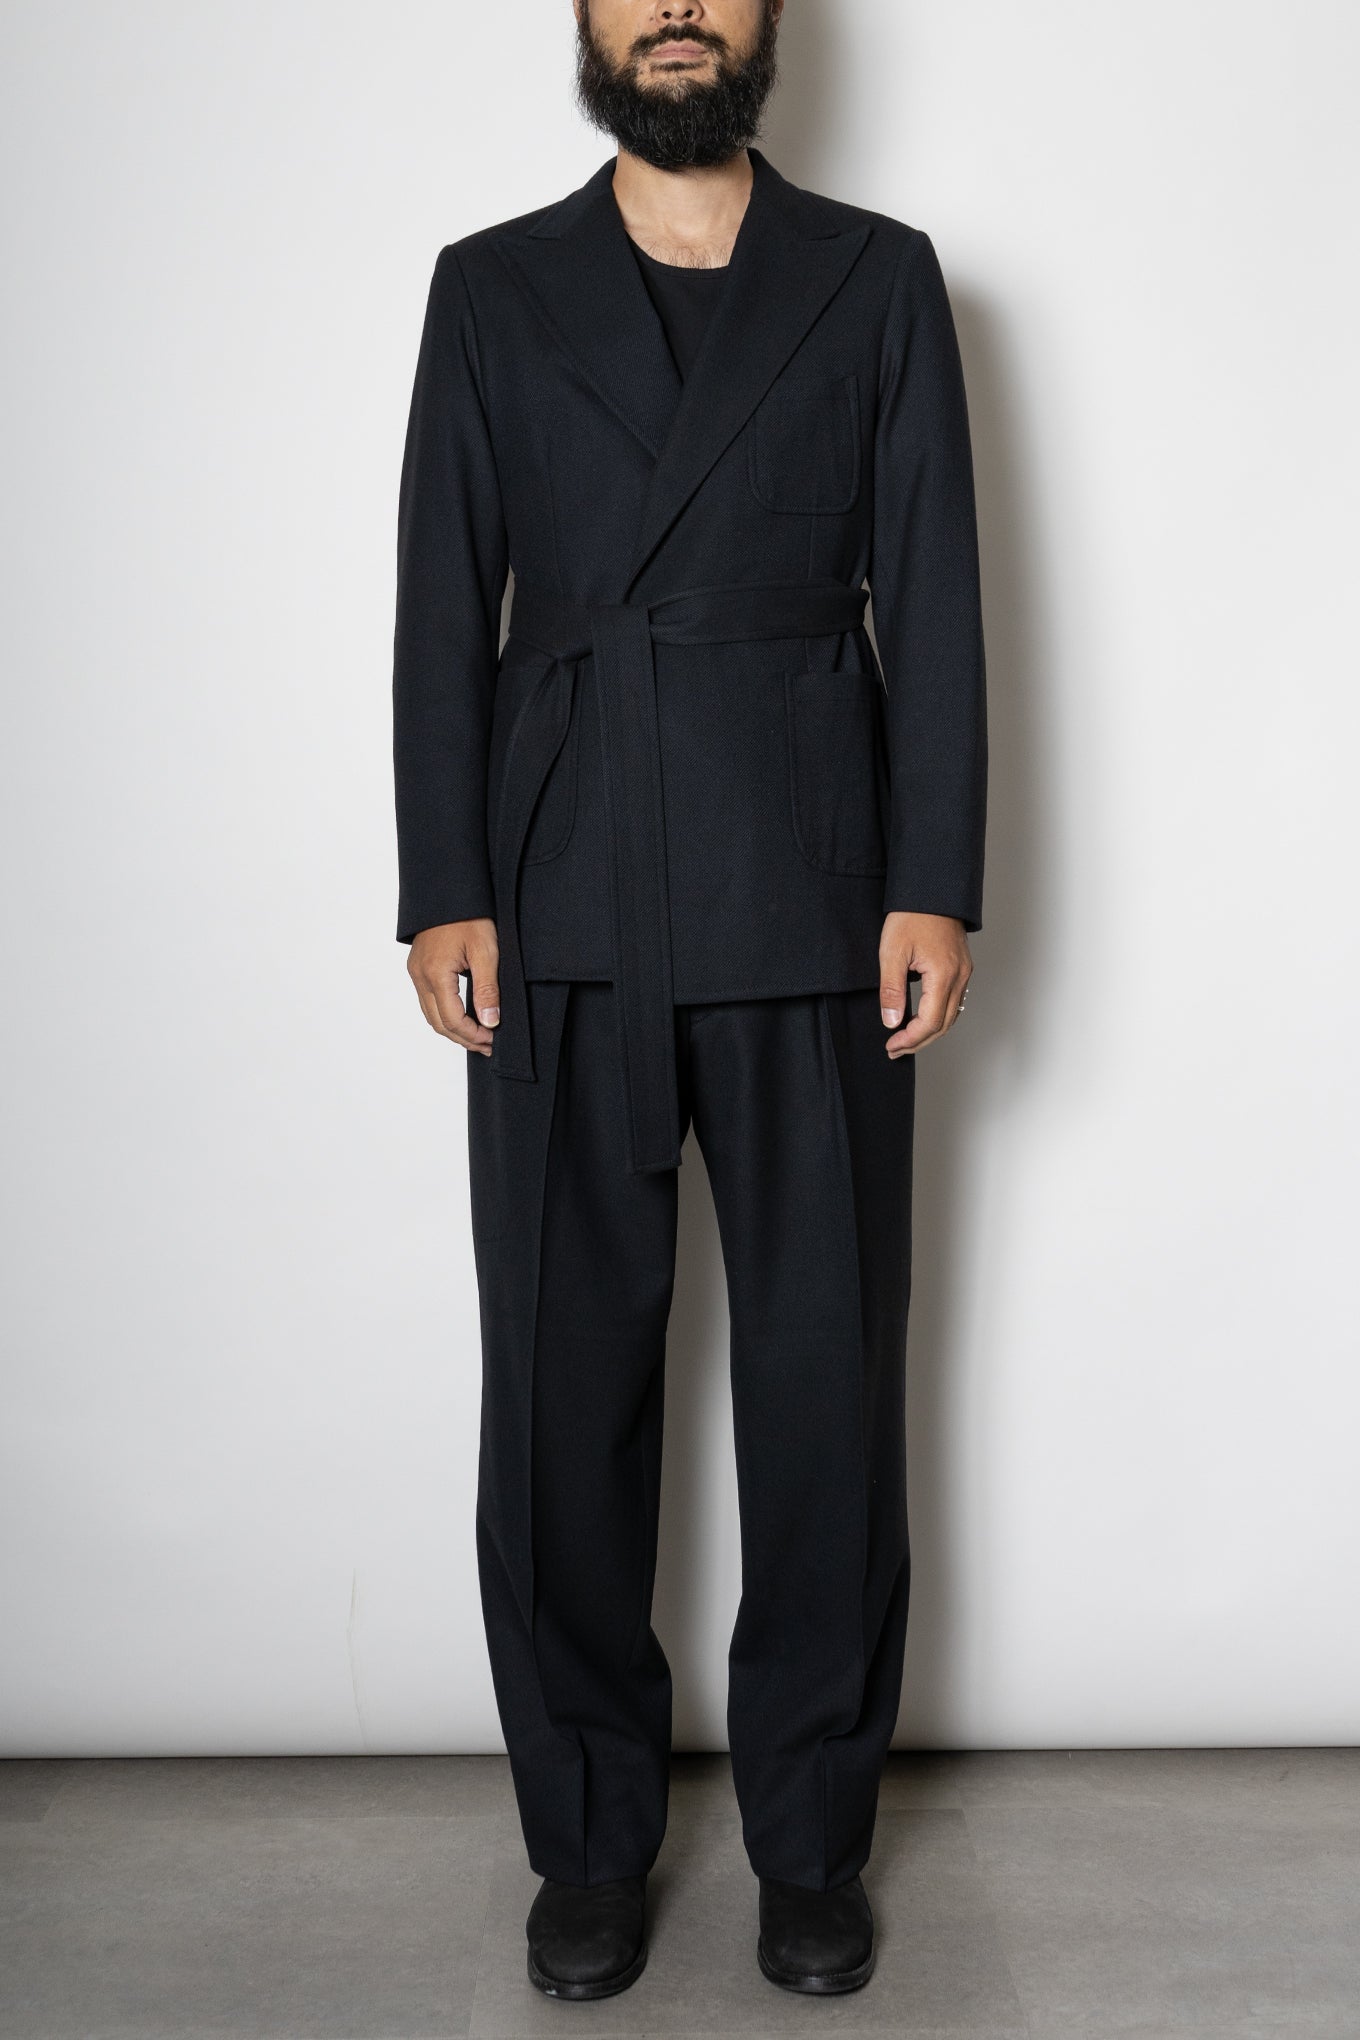 FRENCH TWILL BELTED JACKET / BLACK - RAINMAKER KYOTO